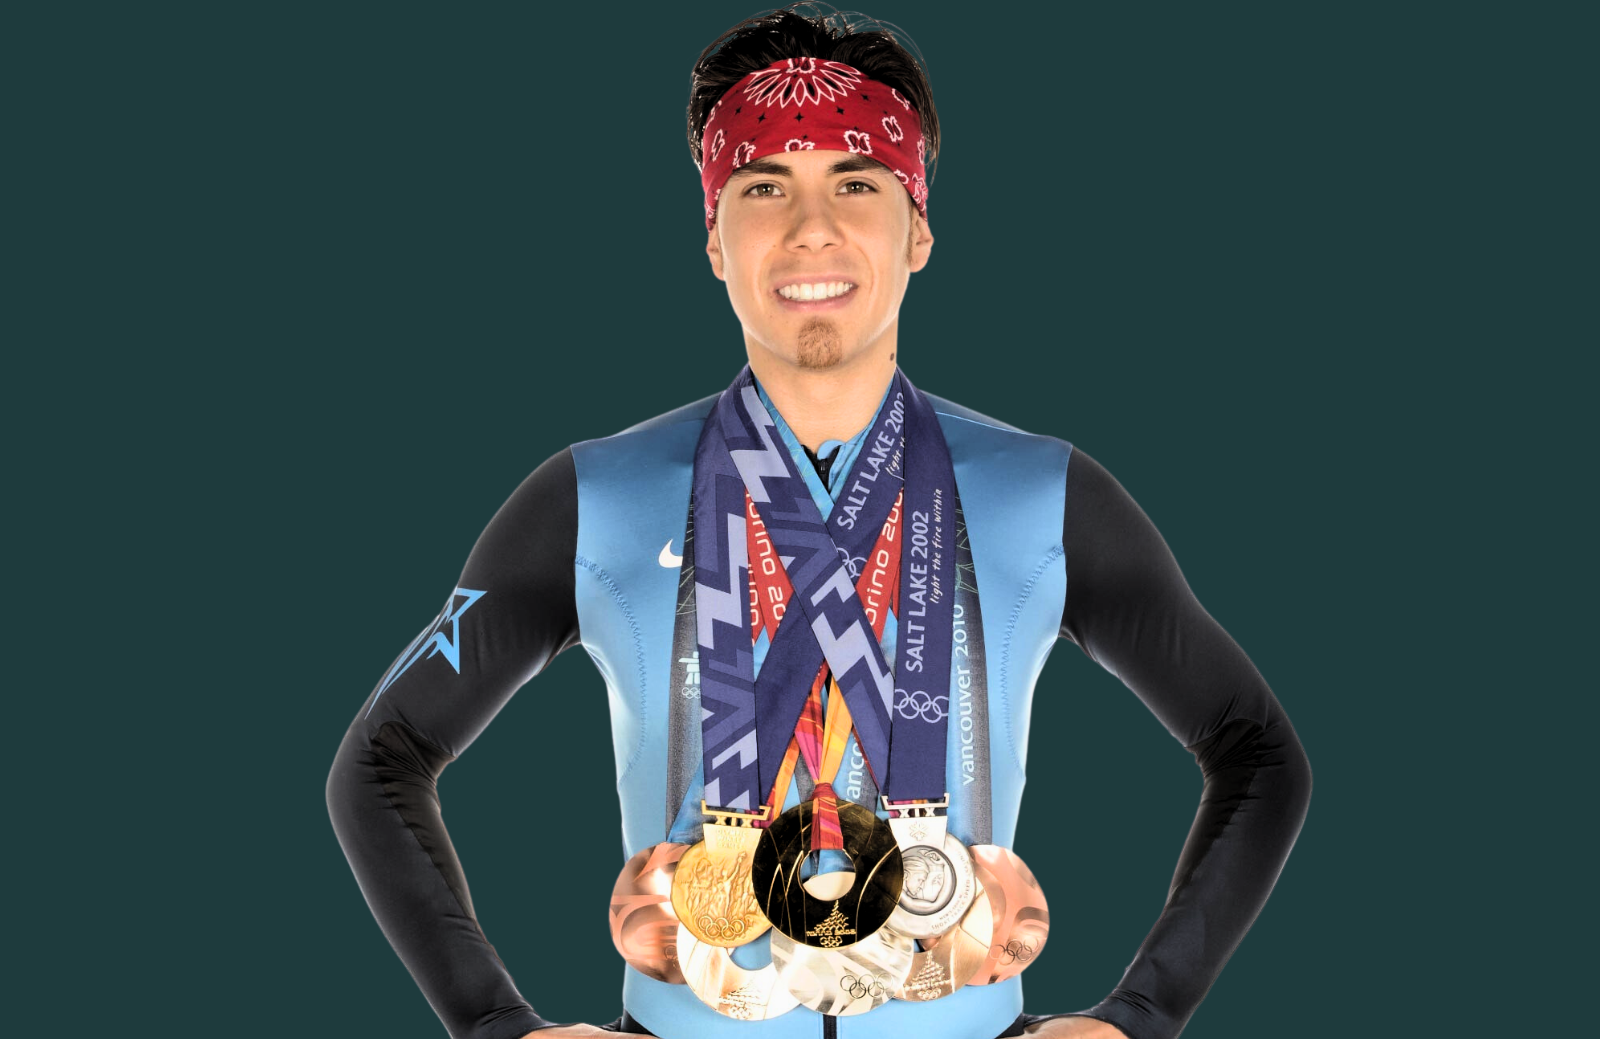 Home | About Apolo Ohno | Medals